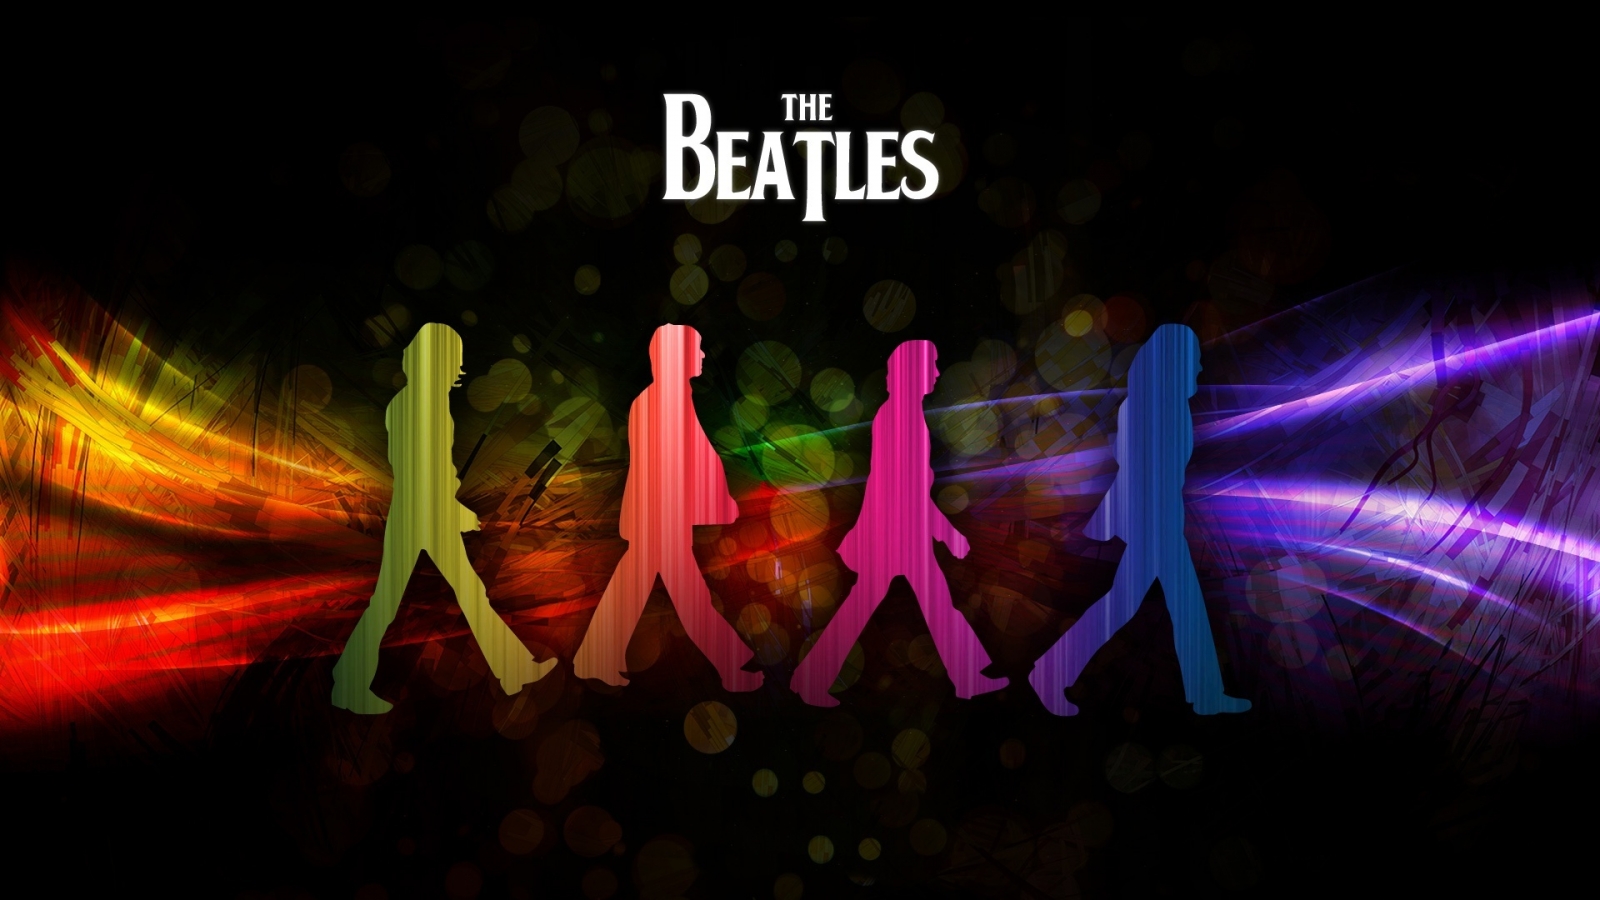 The Beatles Shadows for 1600 x 900 HDTV resolution